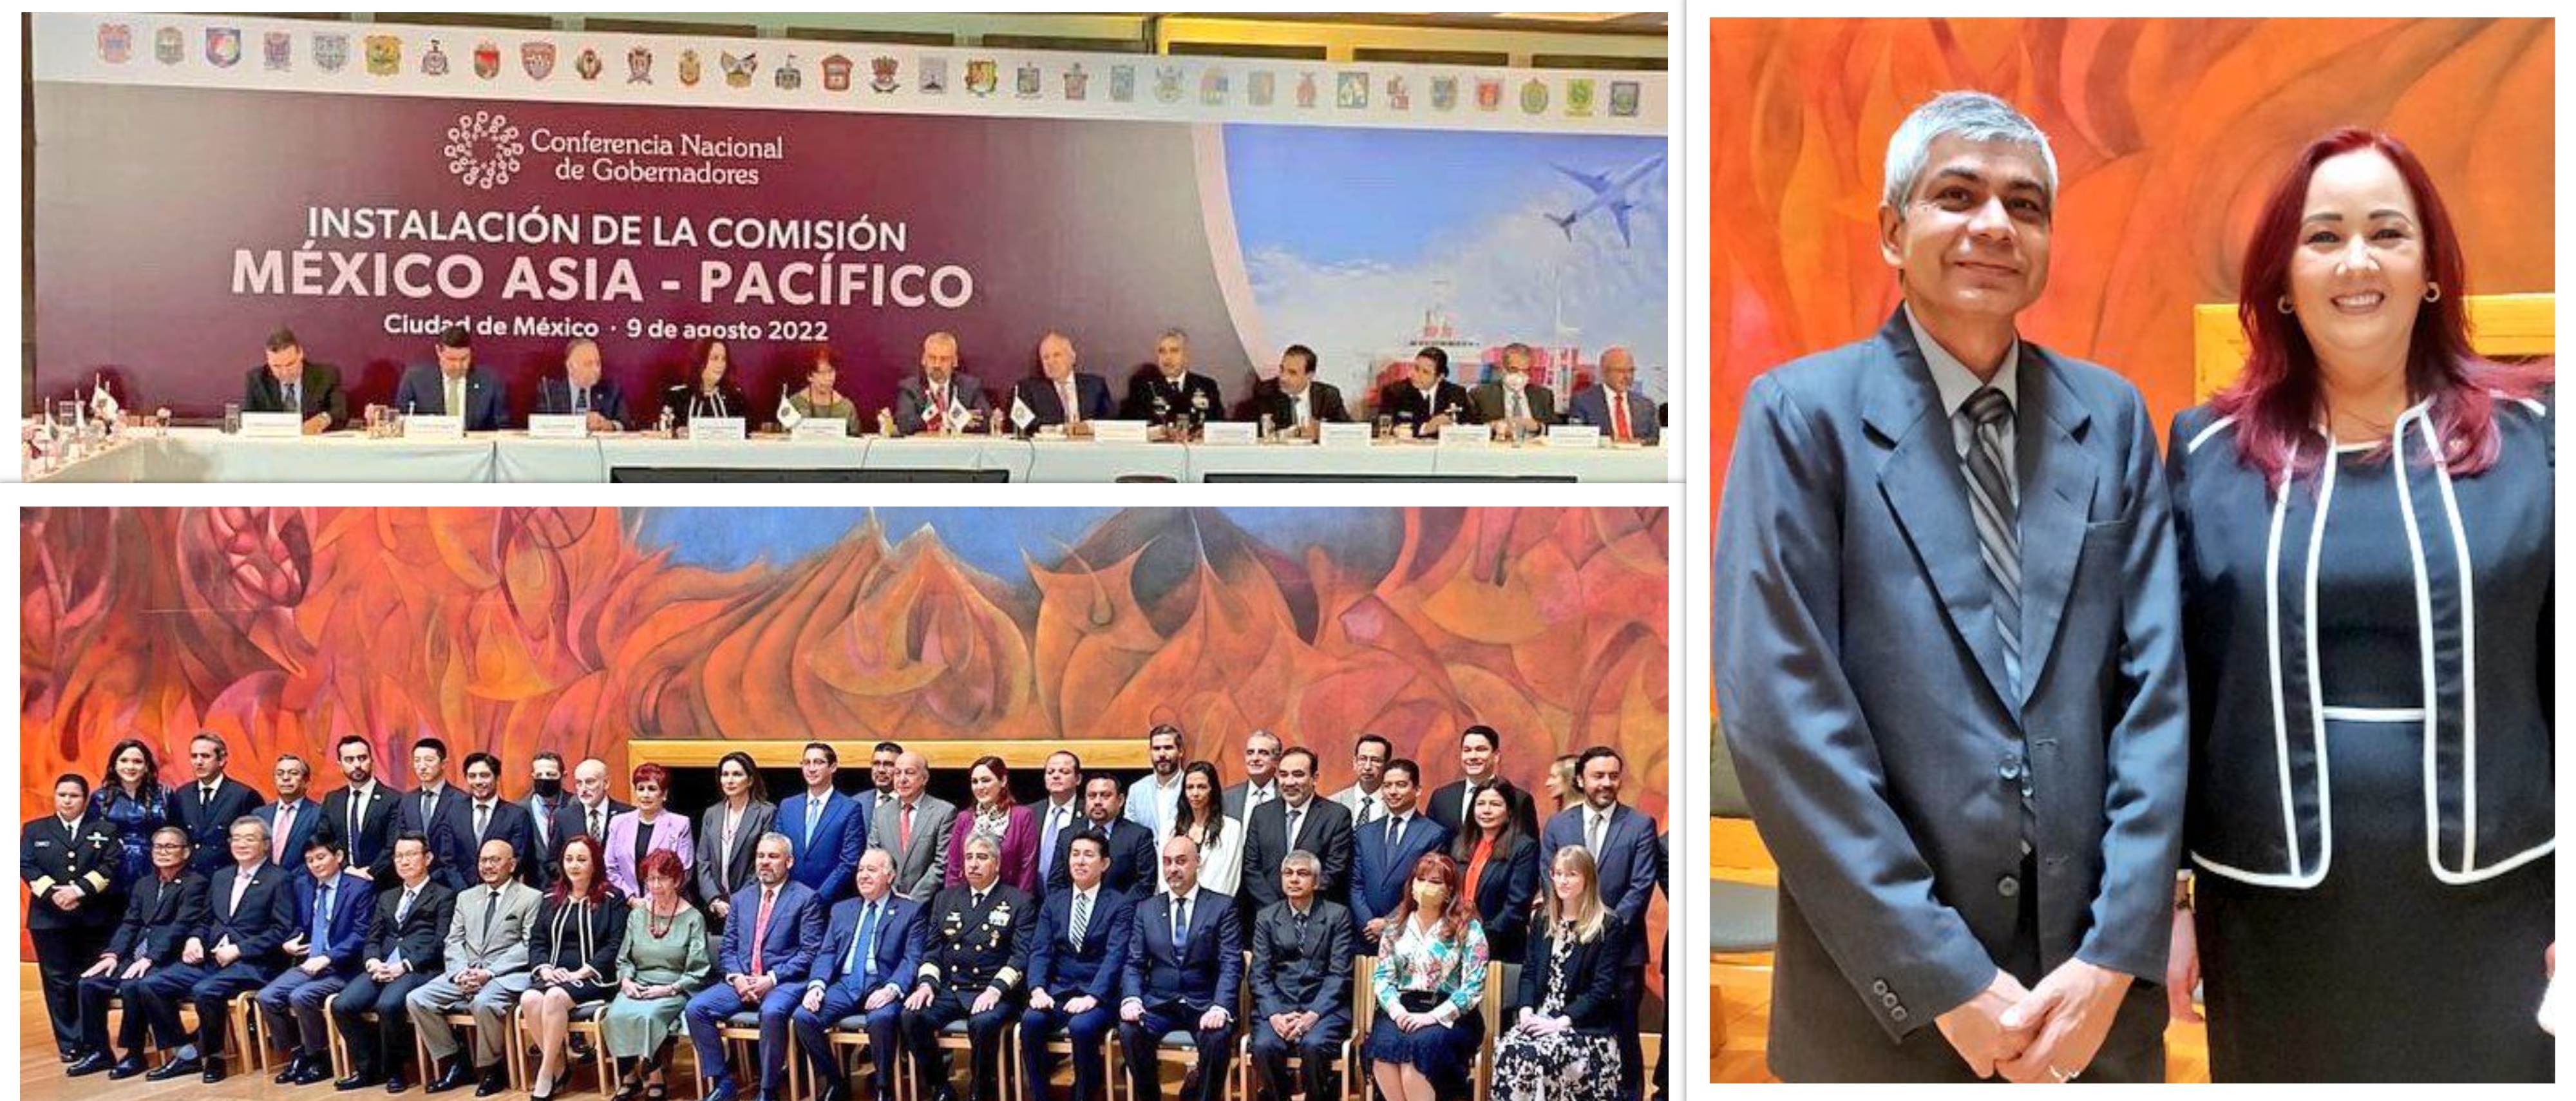  <div style="fcolor: #fff; font-weight: 600; font-size: 1.5em;">
<p style="font-size: 13.8px;"> Ambassador Pankaj Sharma participated in installation of Mexico's Asia-Pacific Commission of CONAGO , chaired by Governor  H.E. Mr. Alfredo Ramírez Bedolla.

We welcome this development & through this Commission, India looks forward to fostering greater cooperation with Mexico on both levels, governmental & private.



<br /><span style="text-align: center;">10 August 2022</span></p>
</div>